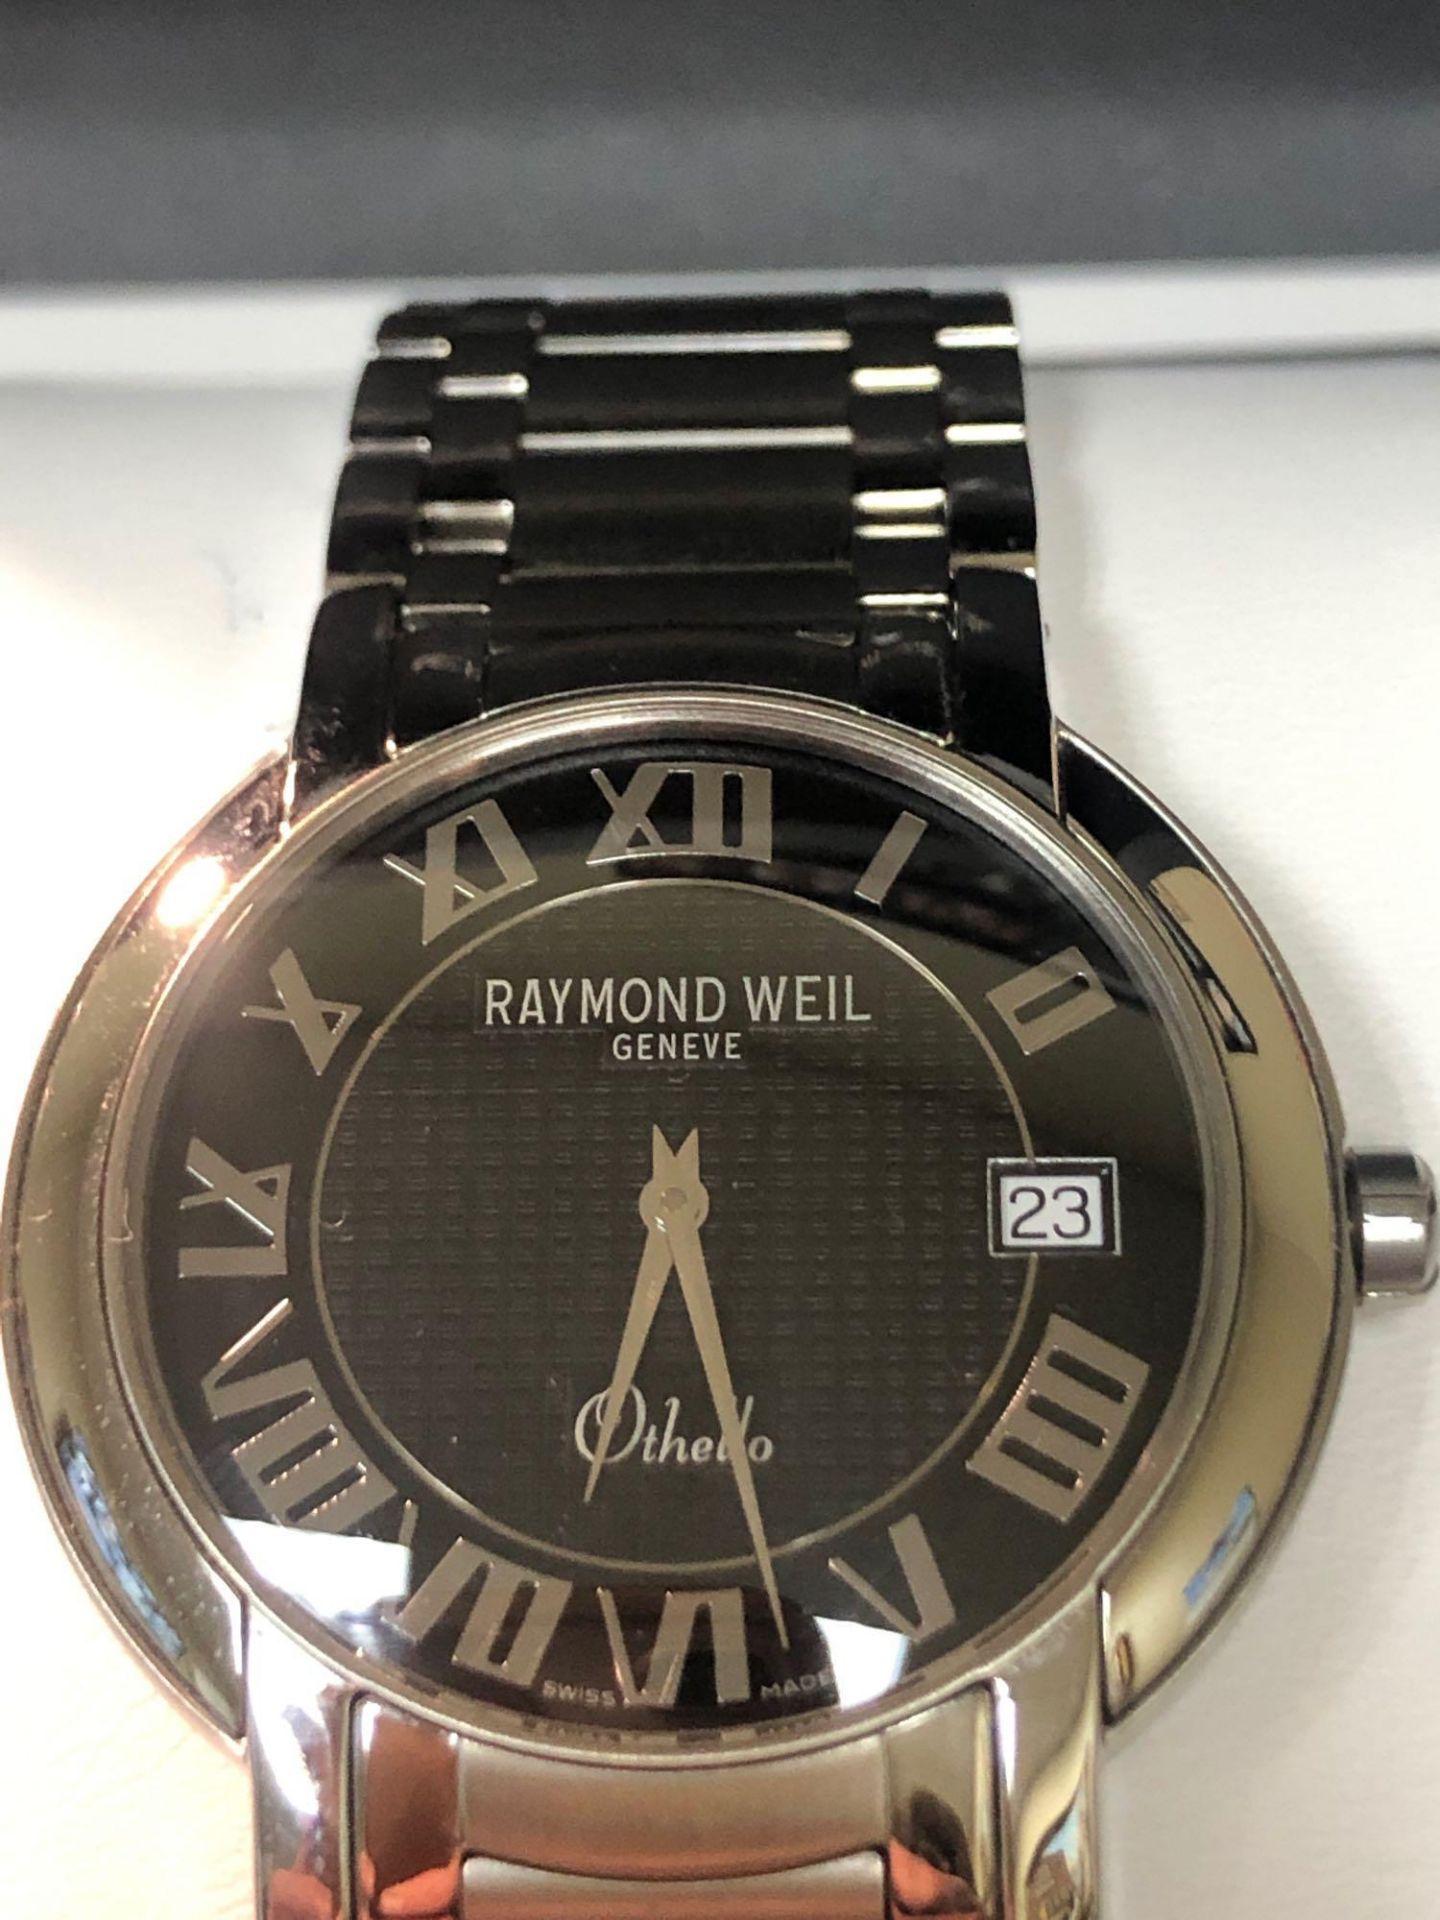 RAYMOND WEIL OTHELLO BLACK DIAL STAINLESS STEEL WATCH - Image 2 of 3